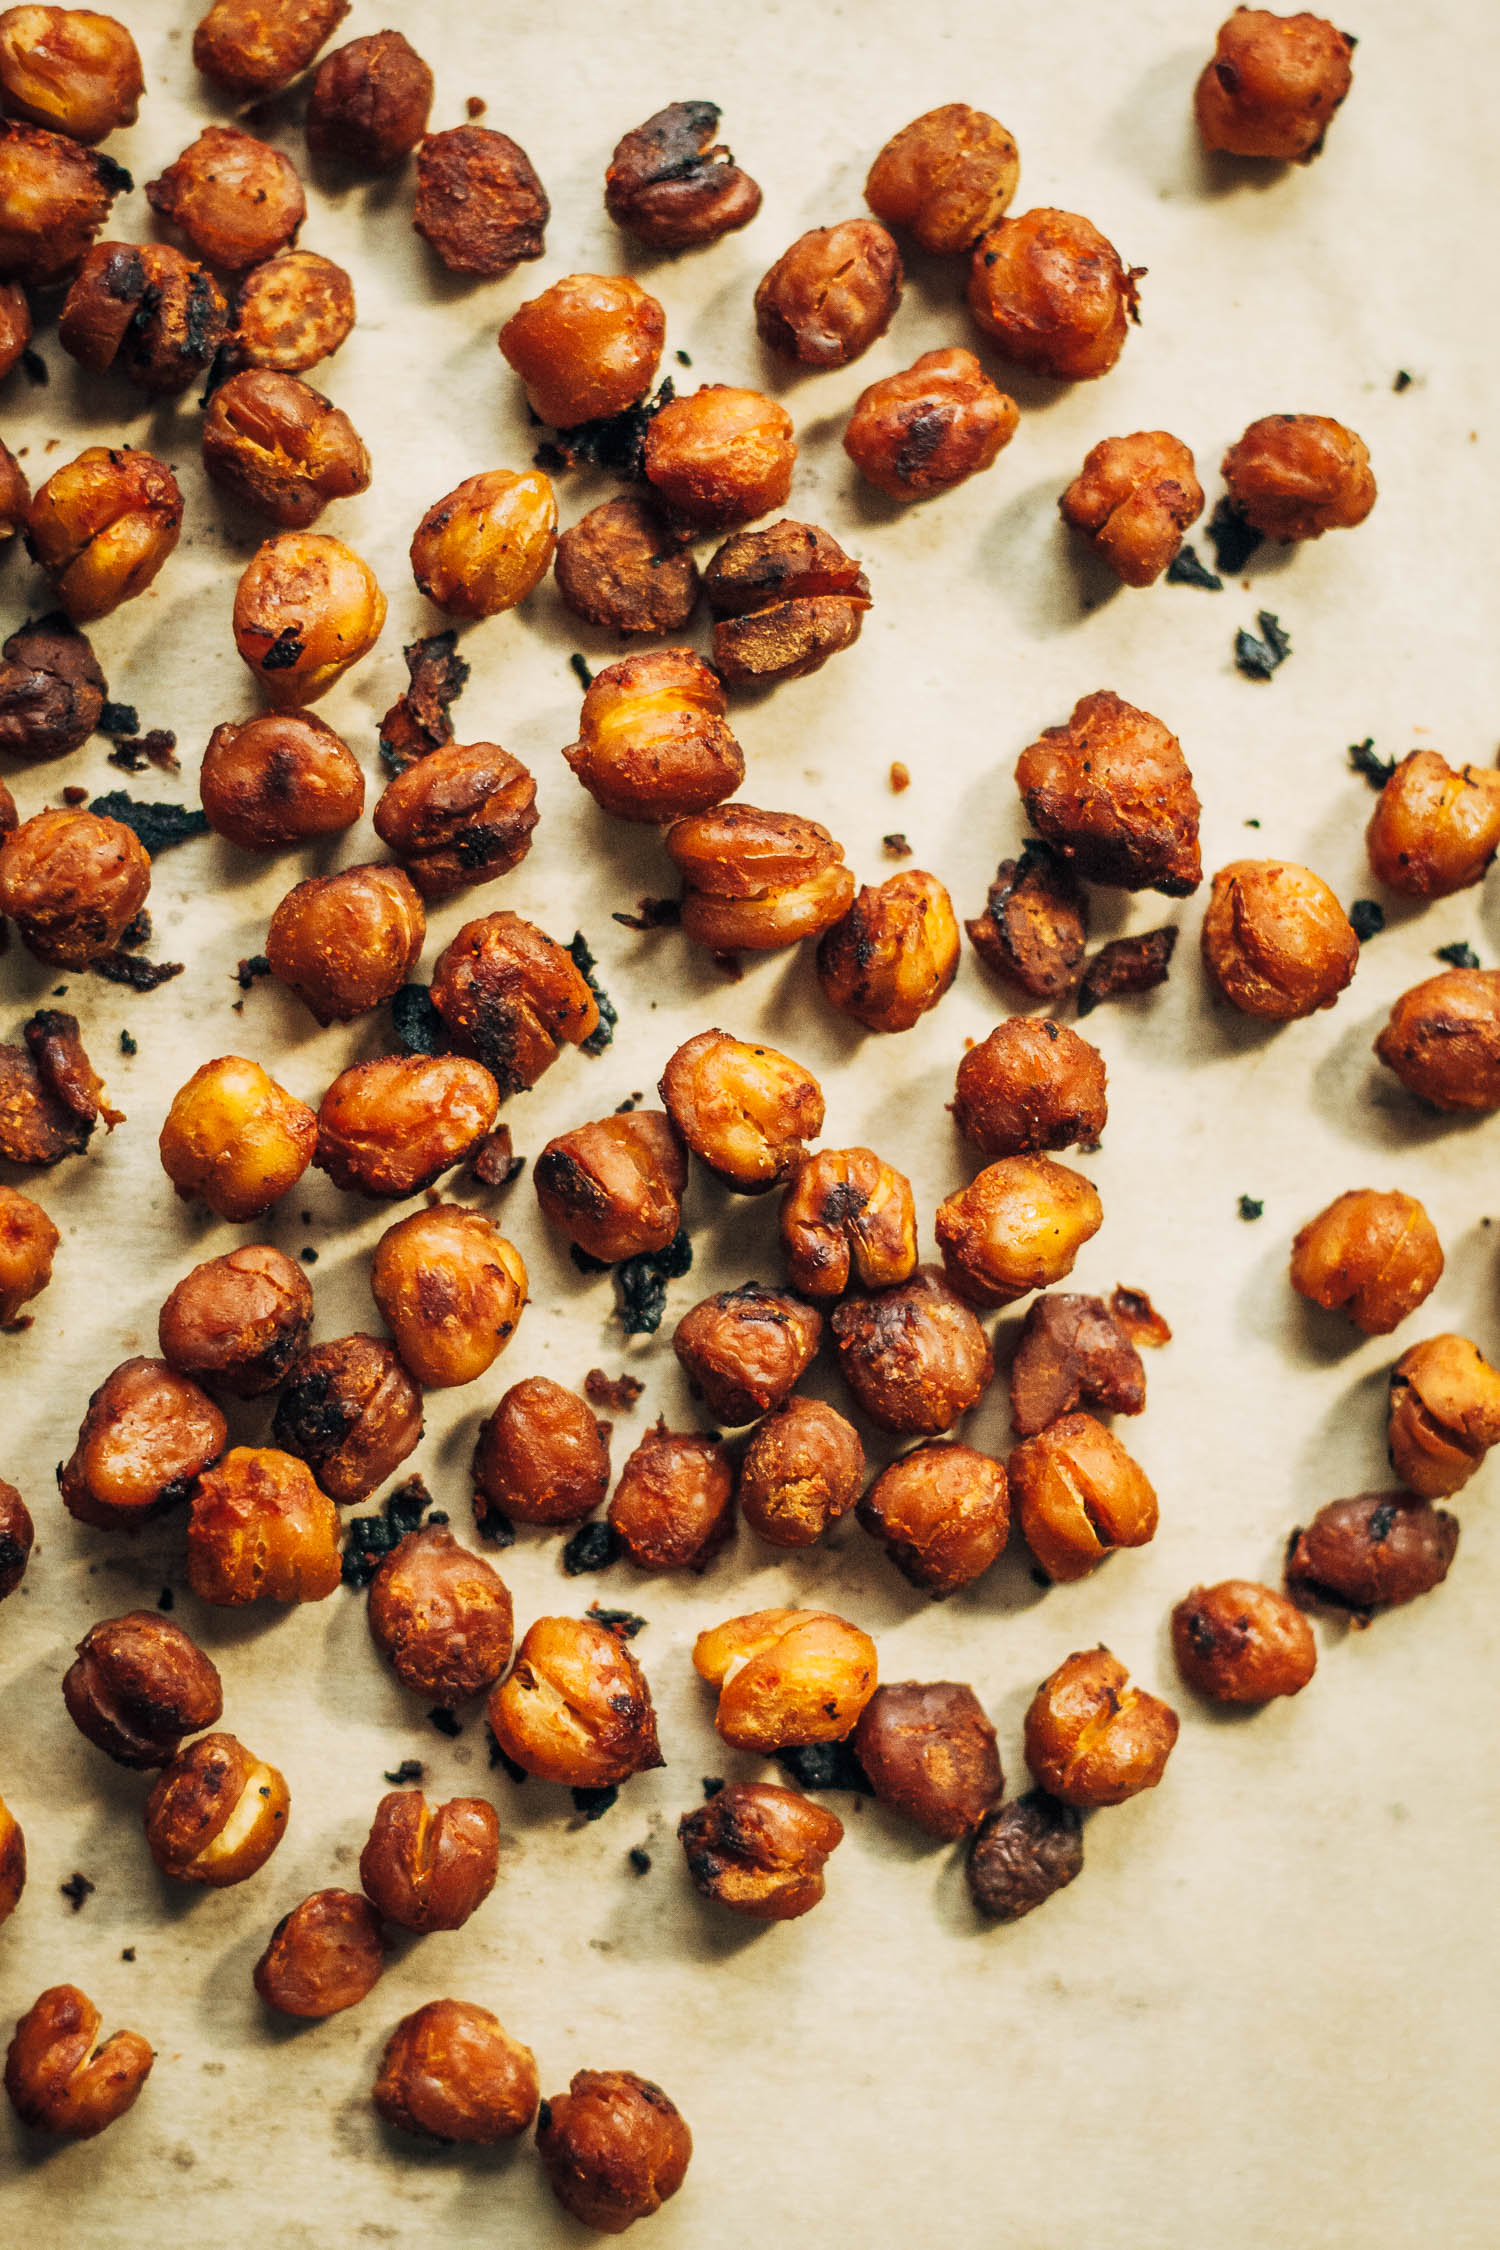 Vegan Bacon Chickpeas | Well and Full | #healthy #easy #recipe